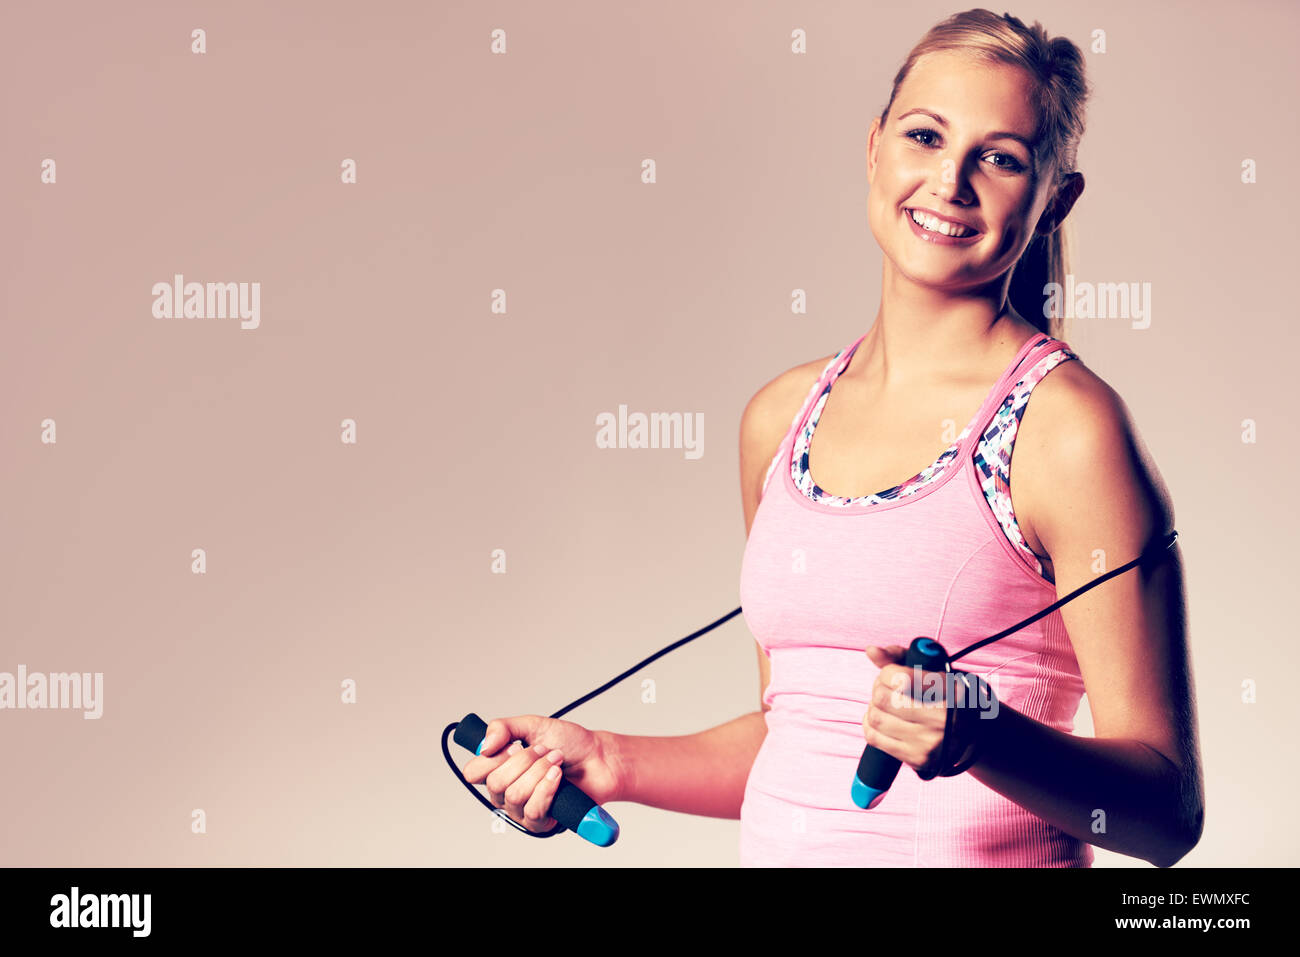 Beautiful Focused Woman In Sports Bra And White Shorts Using Headphones And  Blue Skipping Rope On Concrete Background Stock Photo, Picture and Royalty  Free Image. Image 181286831.